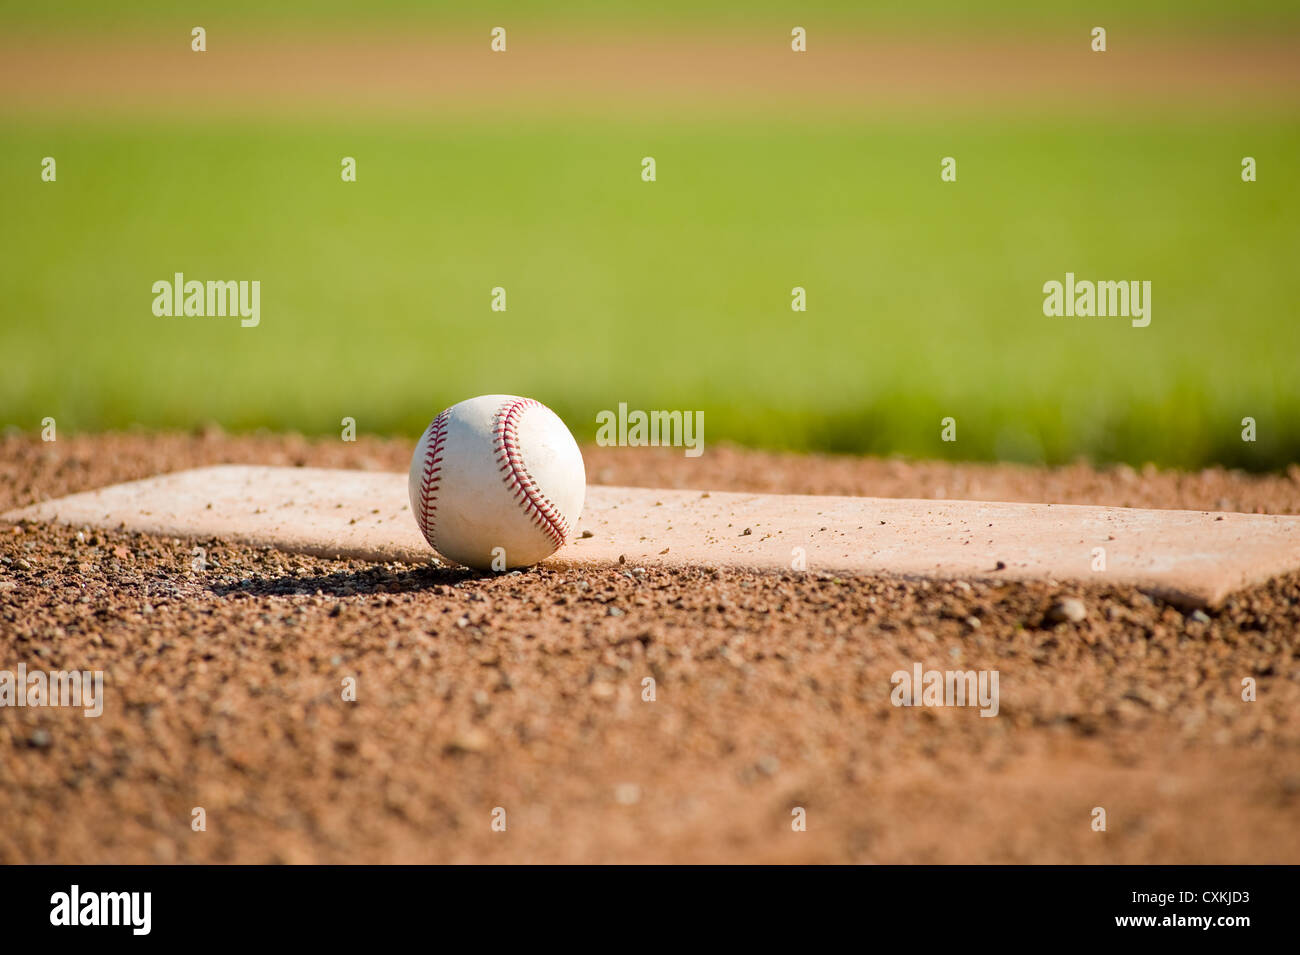 A white leather baseball lying on top of the pitcher's mound at a baseball field with copy space Stock Photo